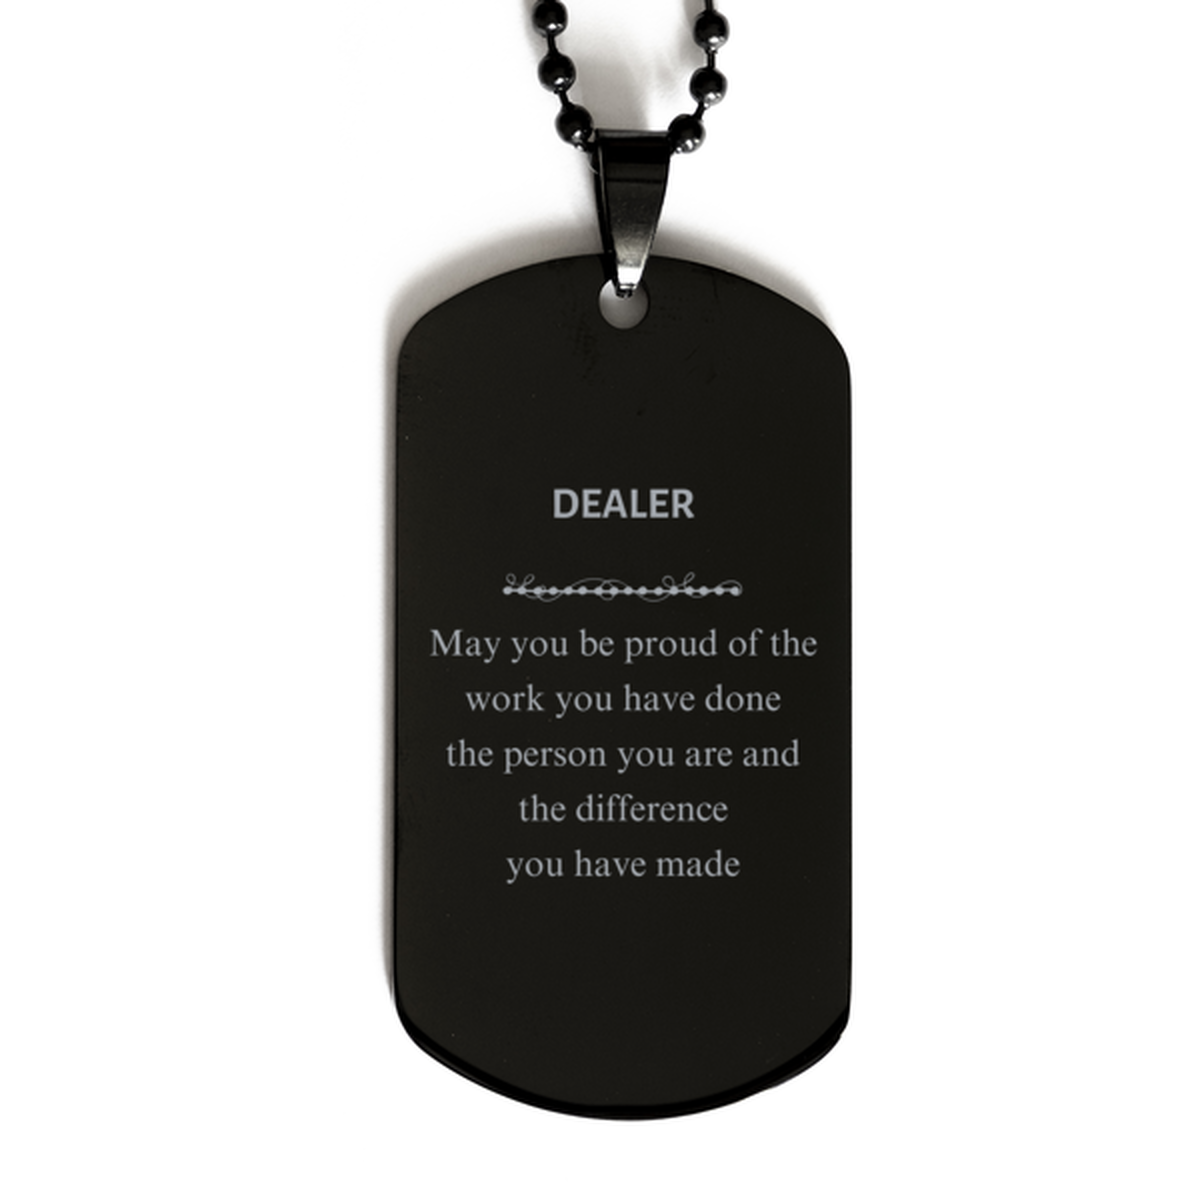 Dealer May you be proud of the work you have done, Retirement Dealer Black Dog Tag for Colleague Appreciation Gifts Amazing for Dealer